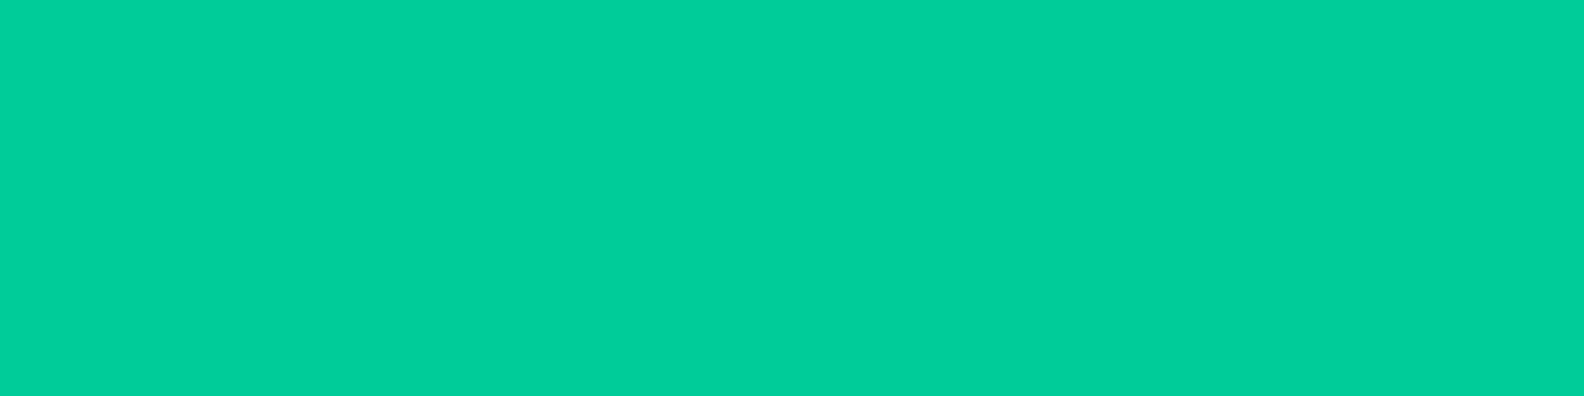 1584x396 Caribbean Green Solid Color Background